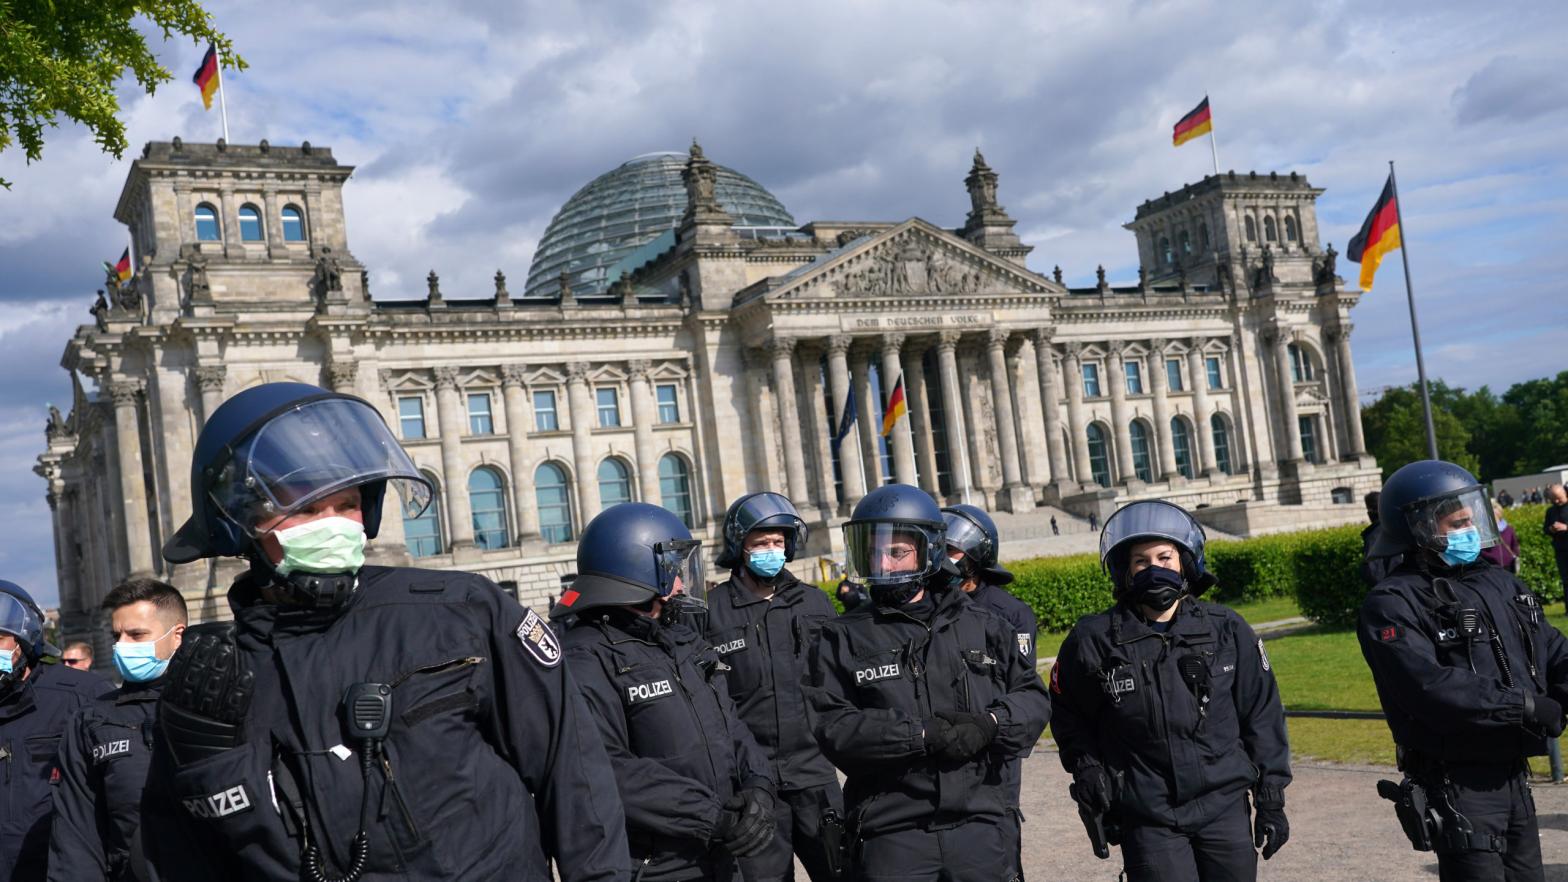 German police photographed outside the Reichstag in Berlin on May 16, 2020.  (Photo: Sean Gallup, Getty Images)